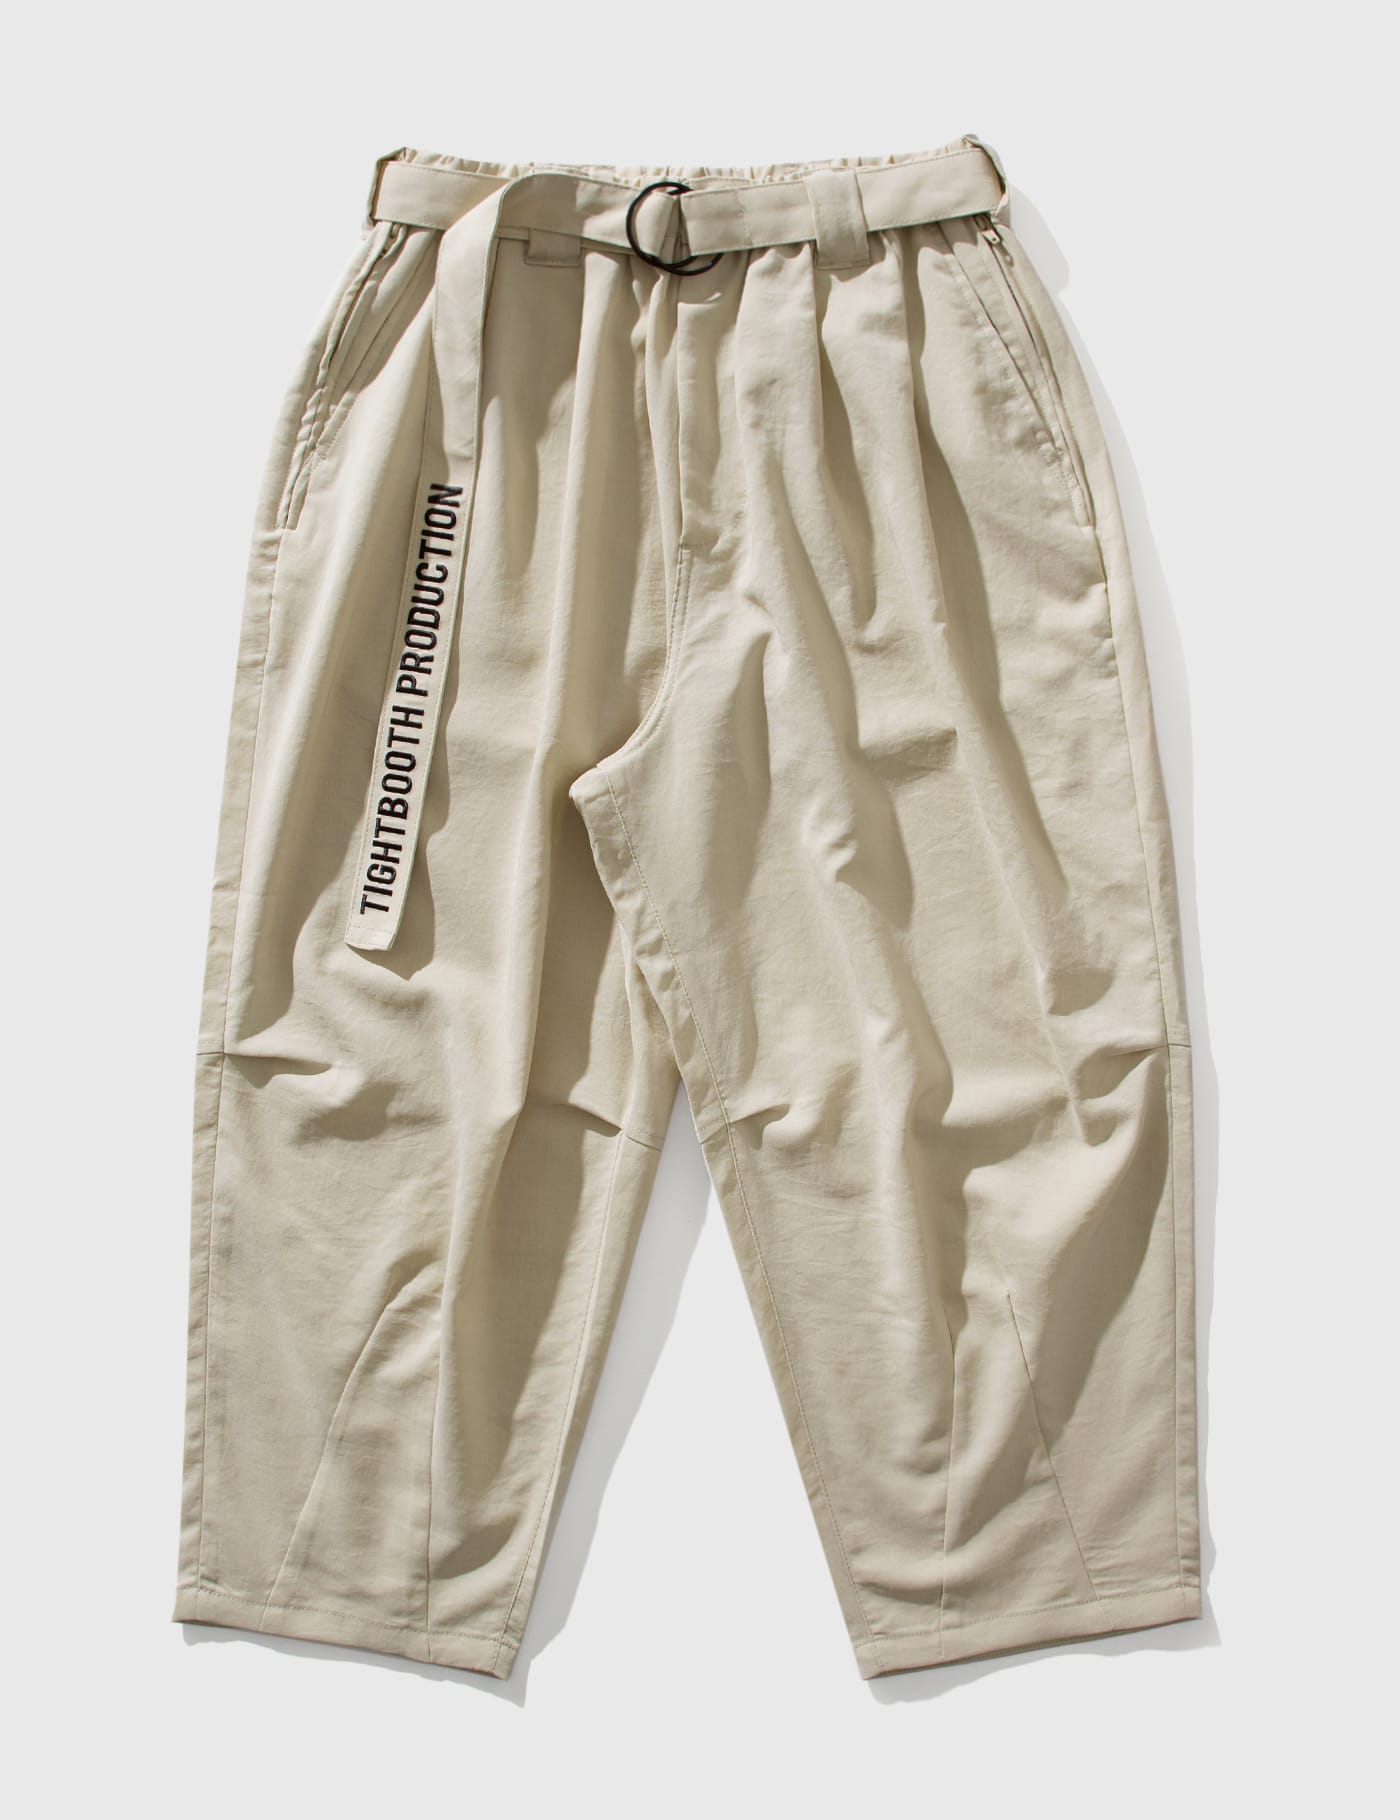 Tightbooth - Balloon Pants | HBX - Globally Curated Fashion and 